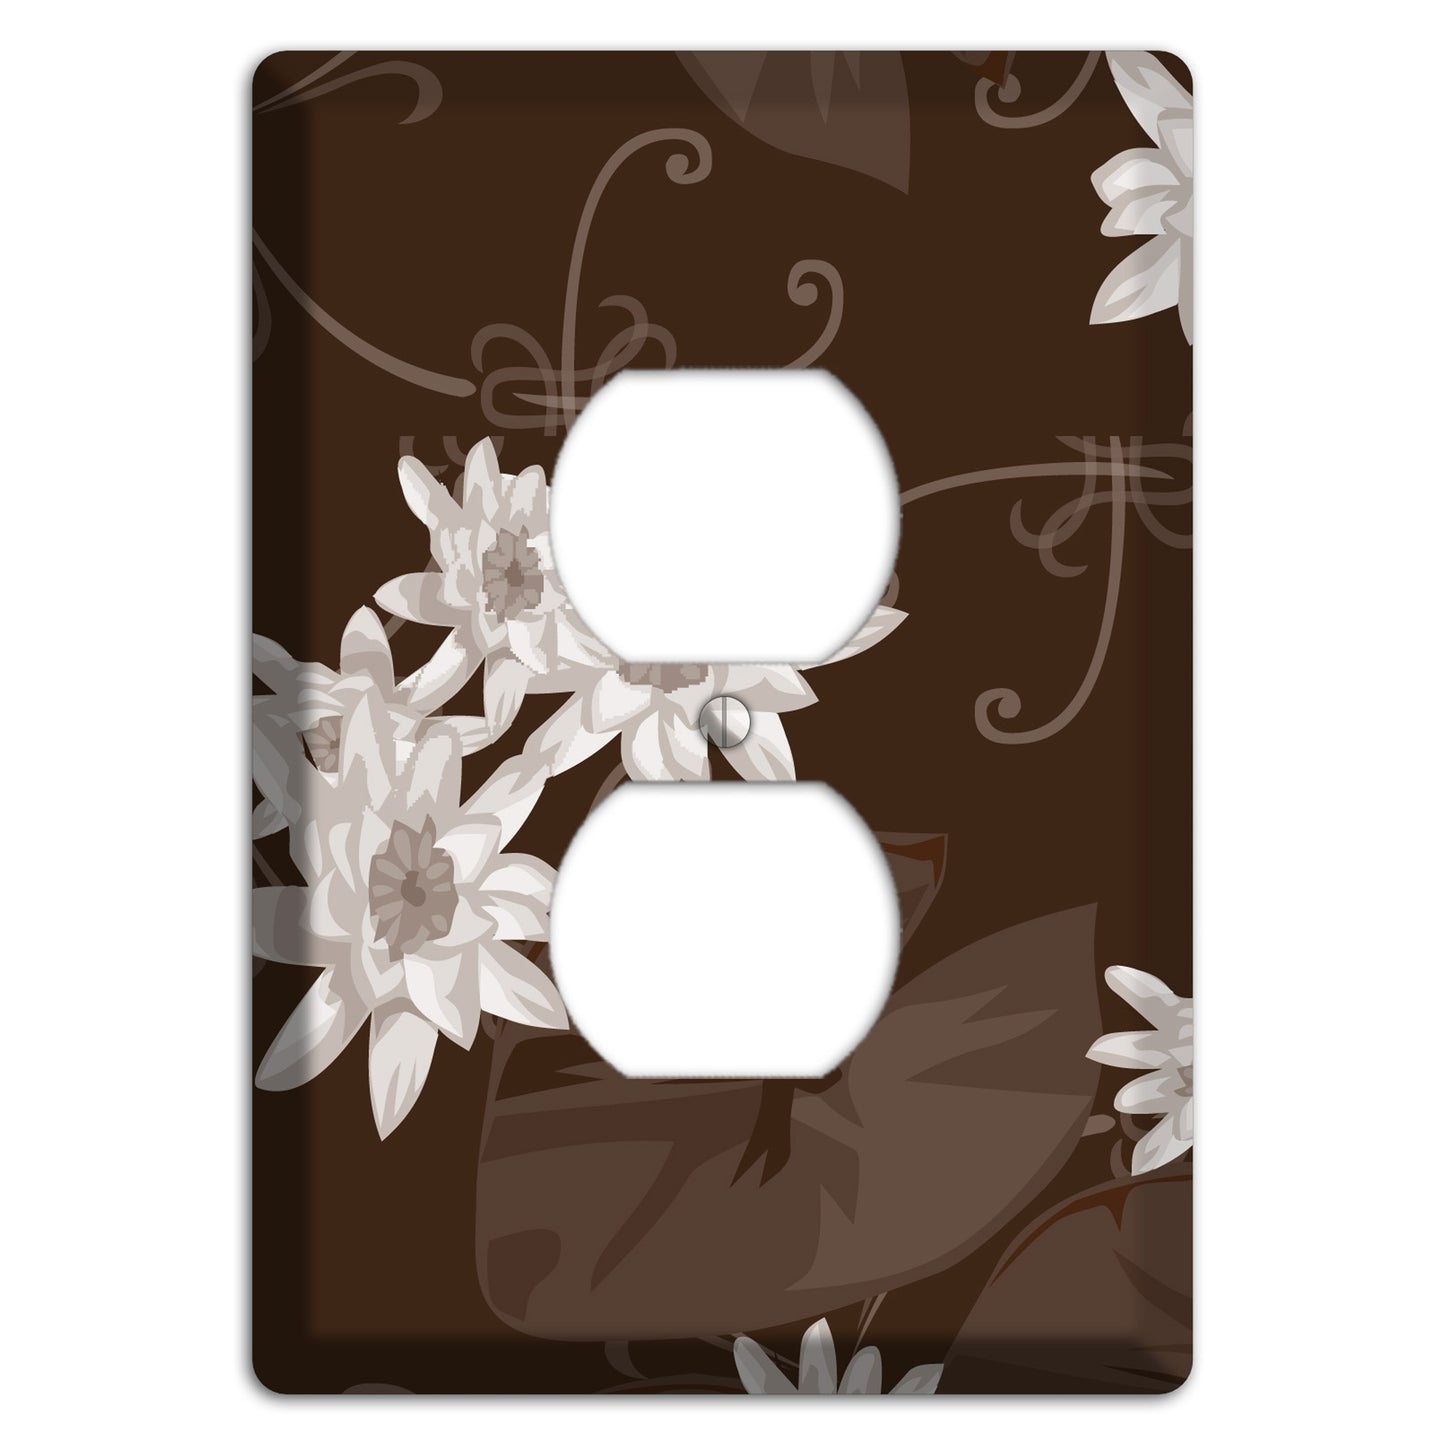 Brown with White Blooms Duplex Outlet Wallplate